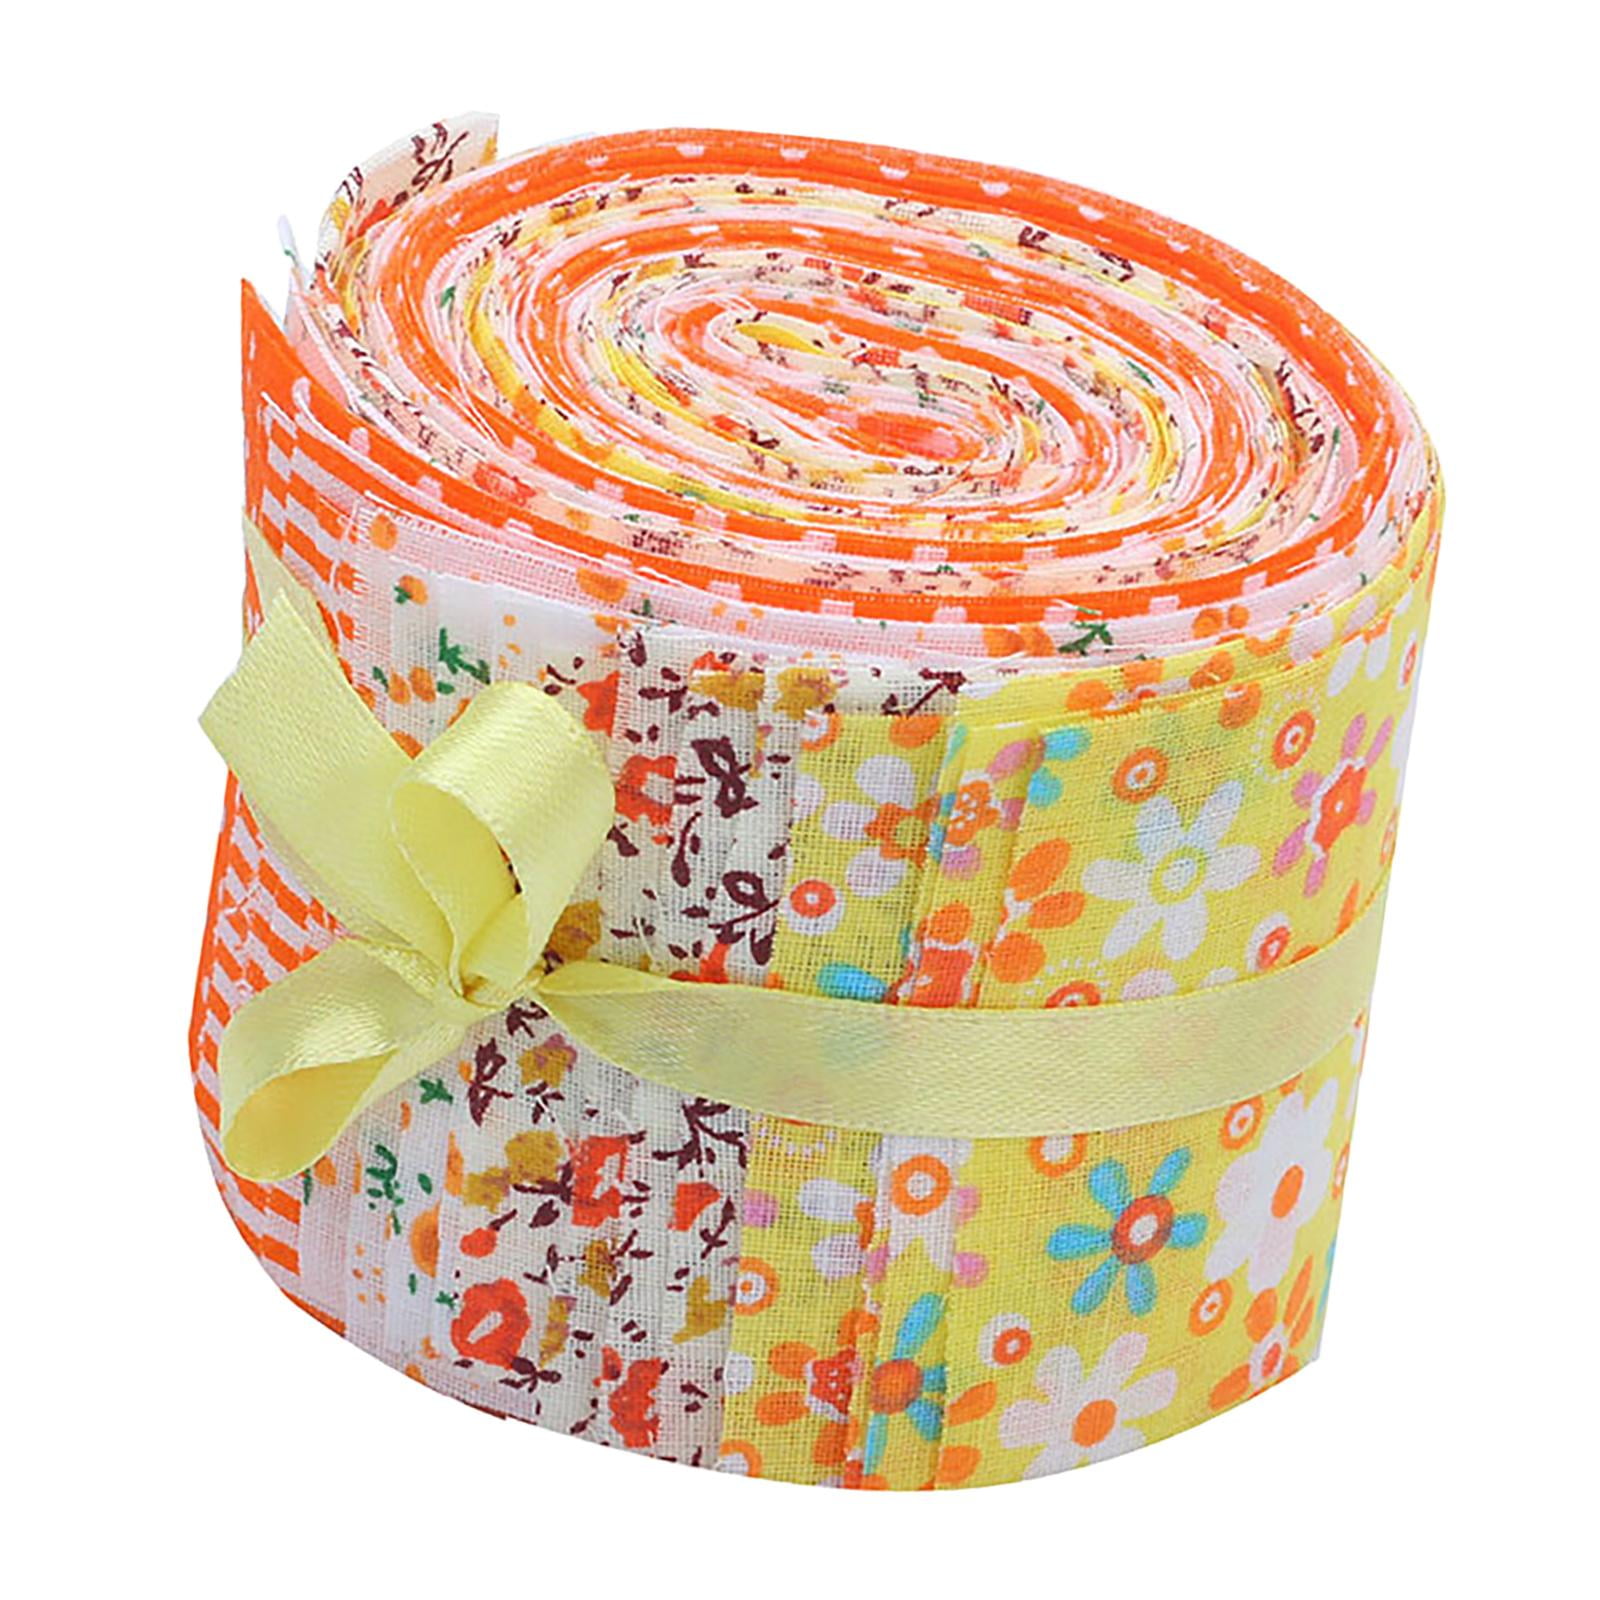 Needles Quilt Studio - (Fine China) 40 Strip Jelly Roll Fabric 2.5 x 44 |  Cotton Strips Bundles - Jelly Rolls for Quilting Assortment Fabrics